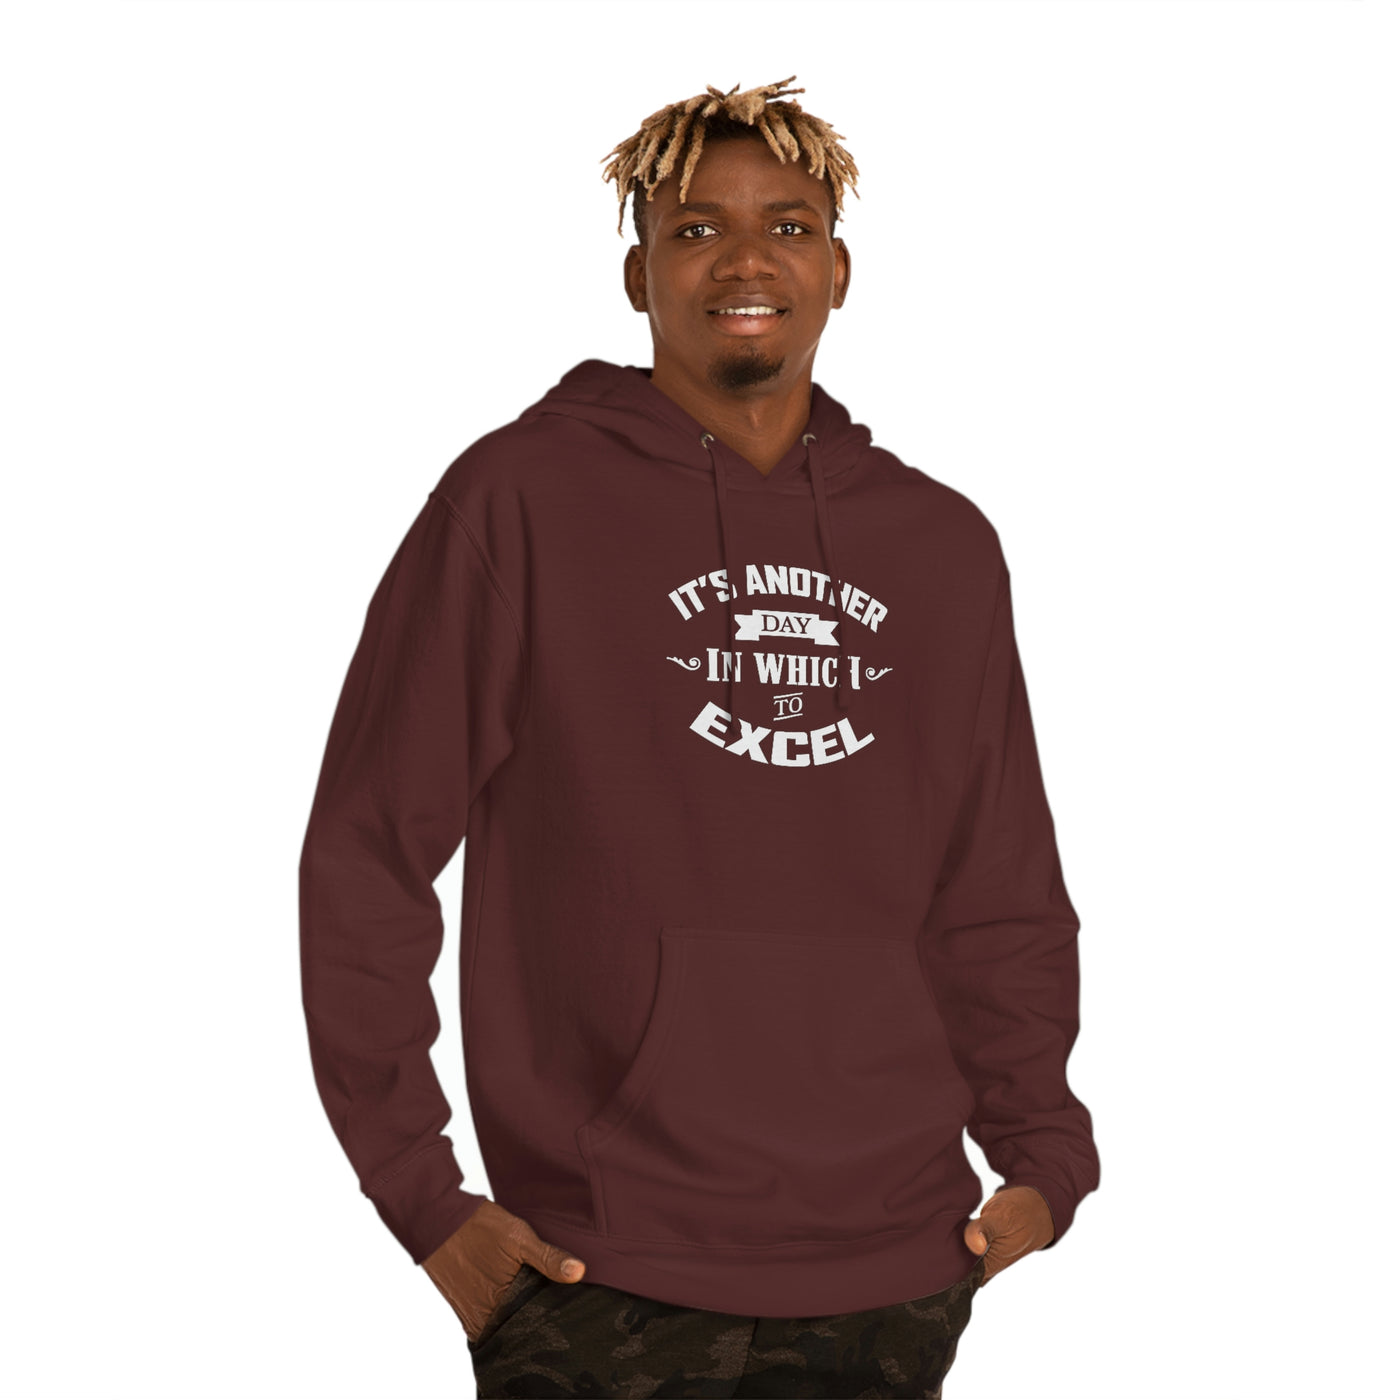 It's Another Day To Excel Hoodie